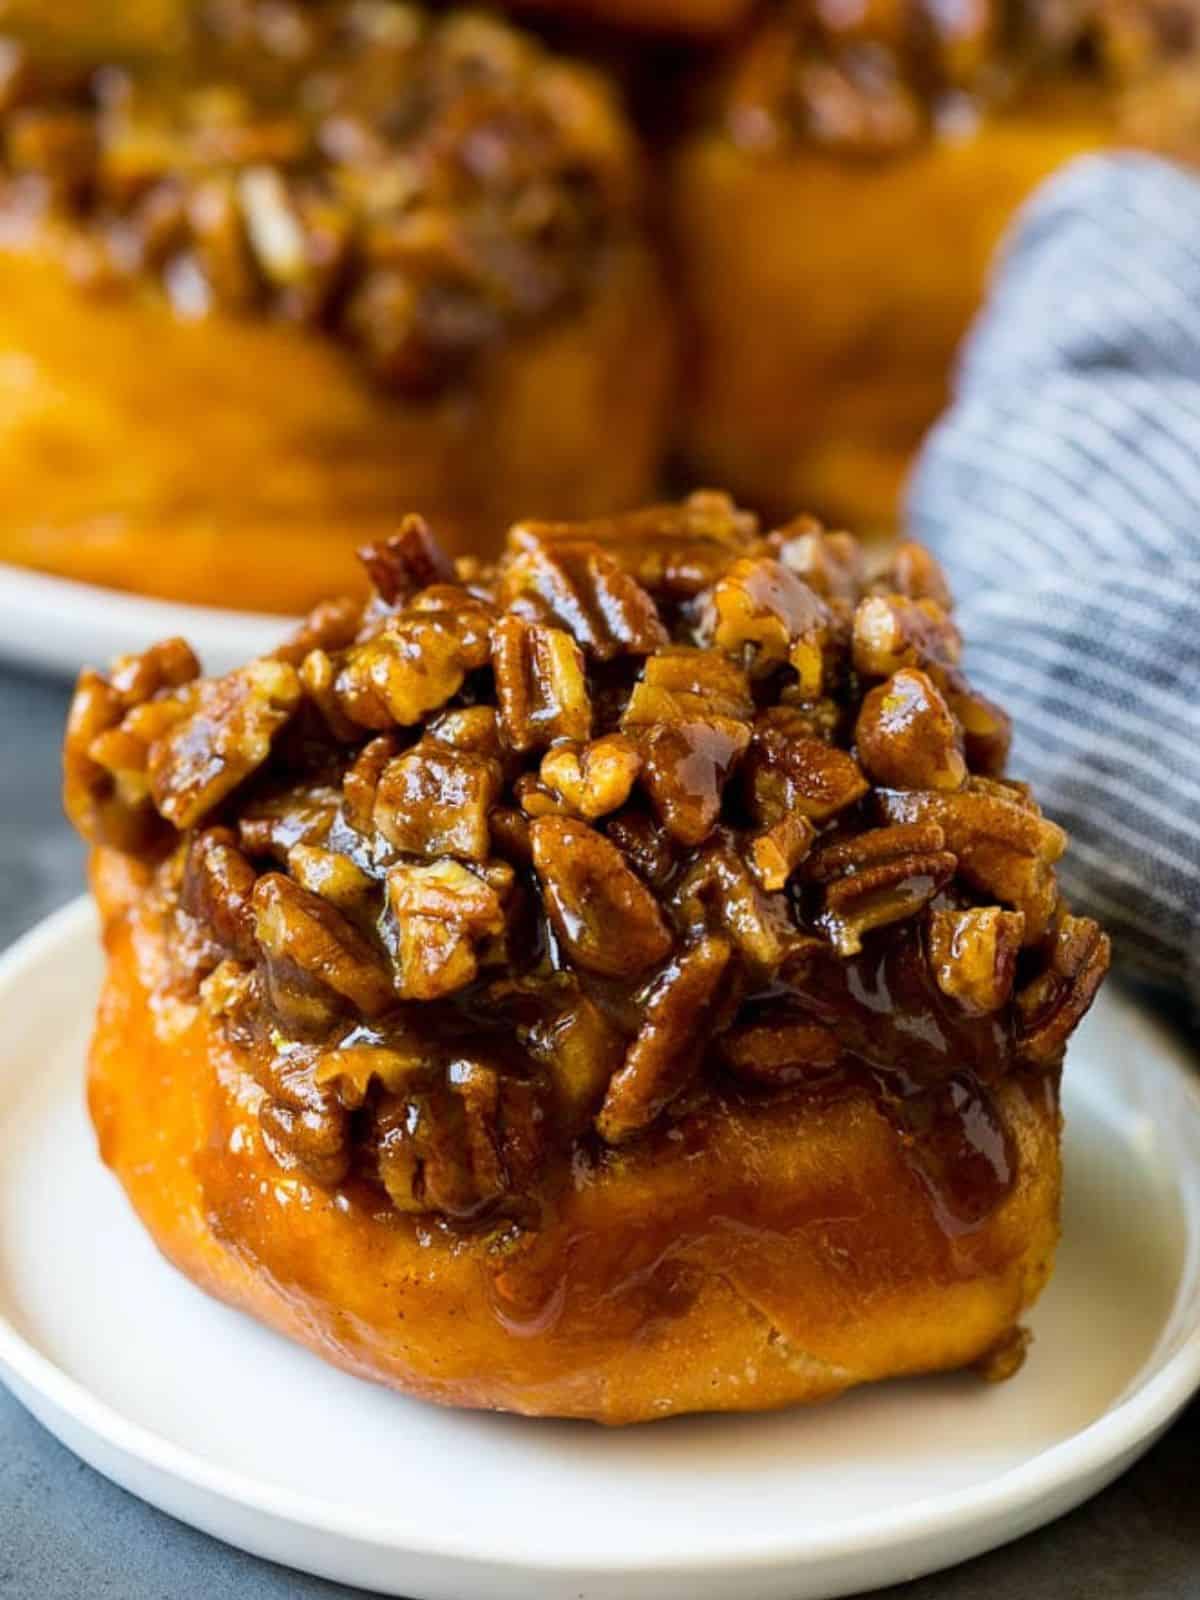 homemade sticky buns topped with crunchy pecans.